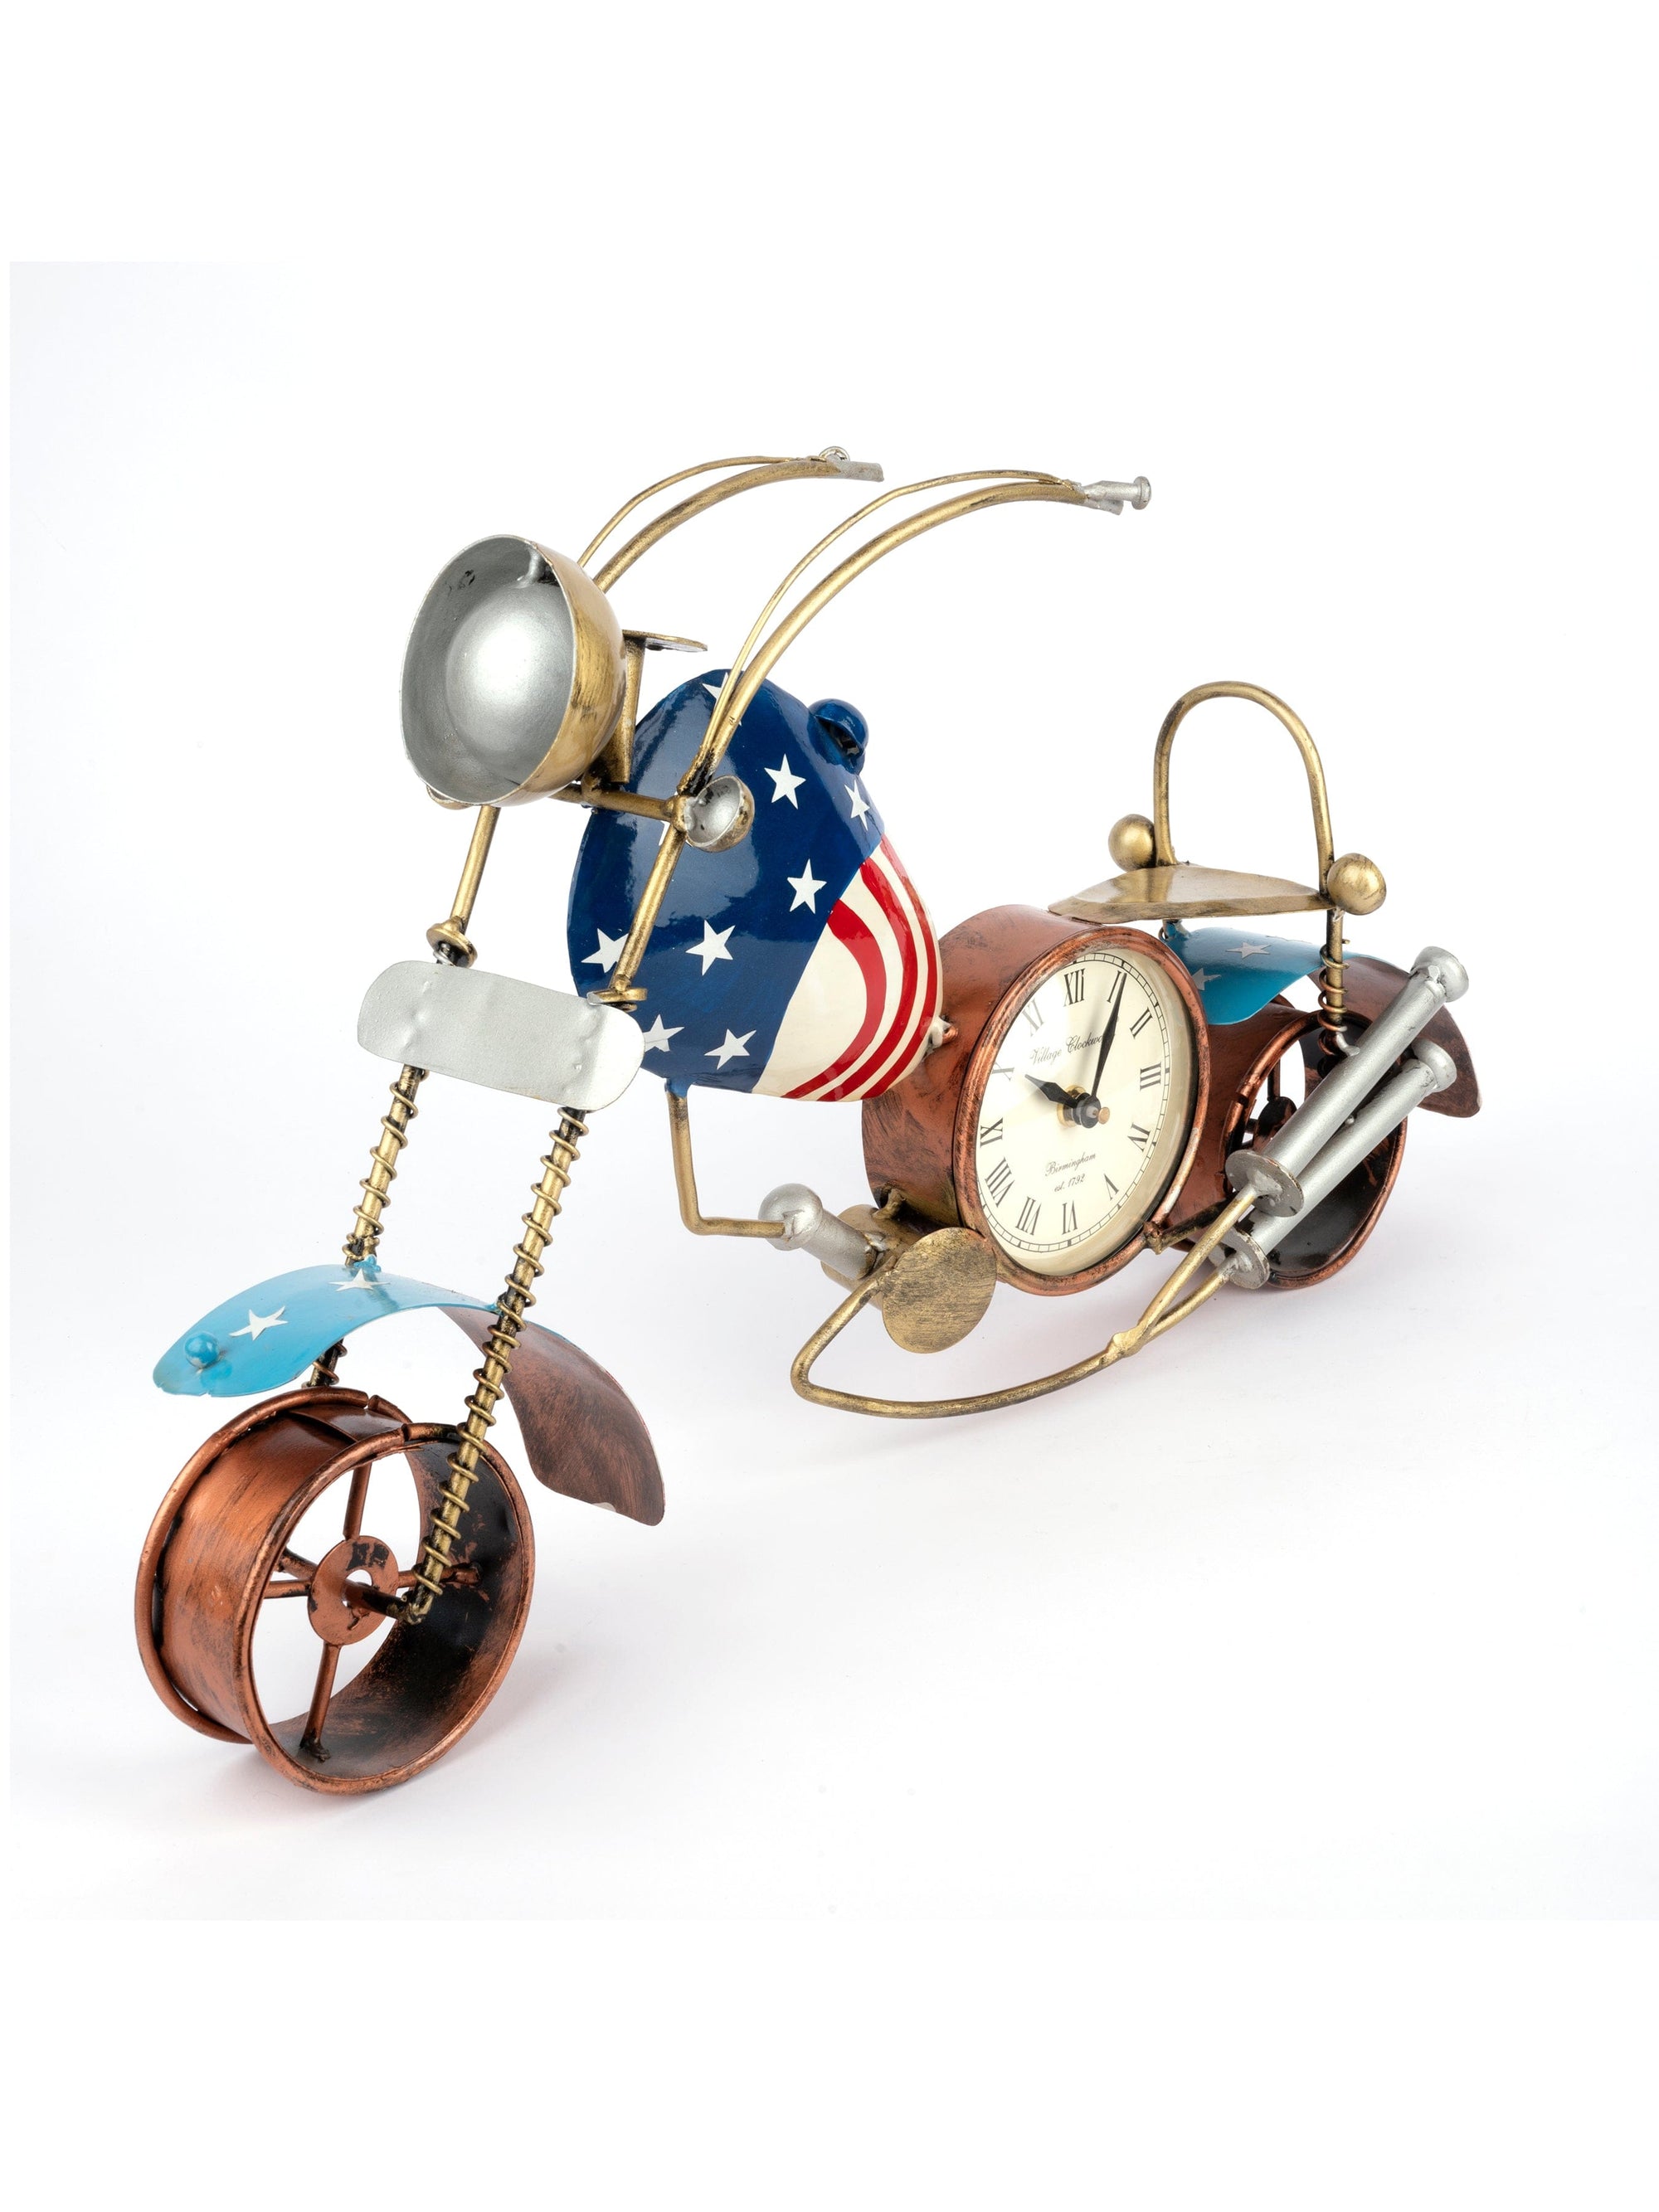 Metal Crafted Bike with Clock Decorative Showpiece - 20 inches - The Heritage Artifacts